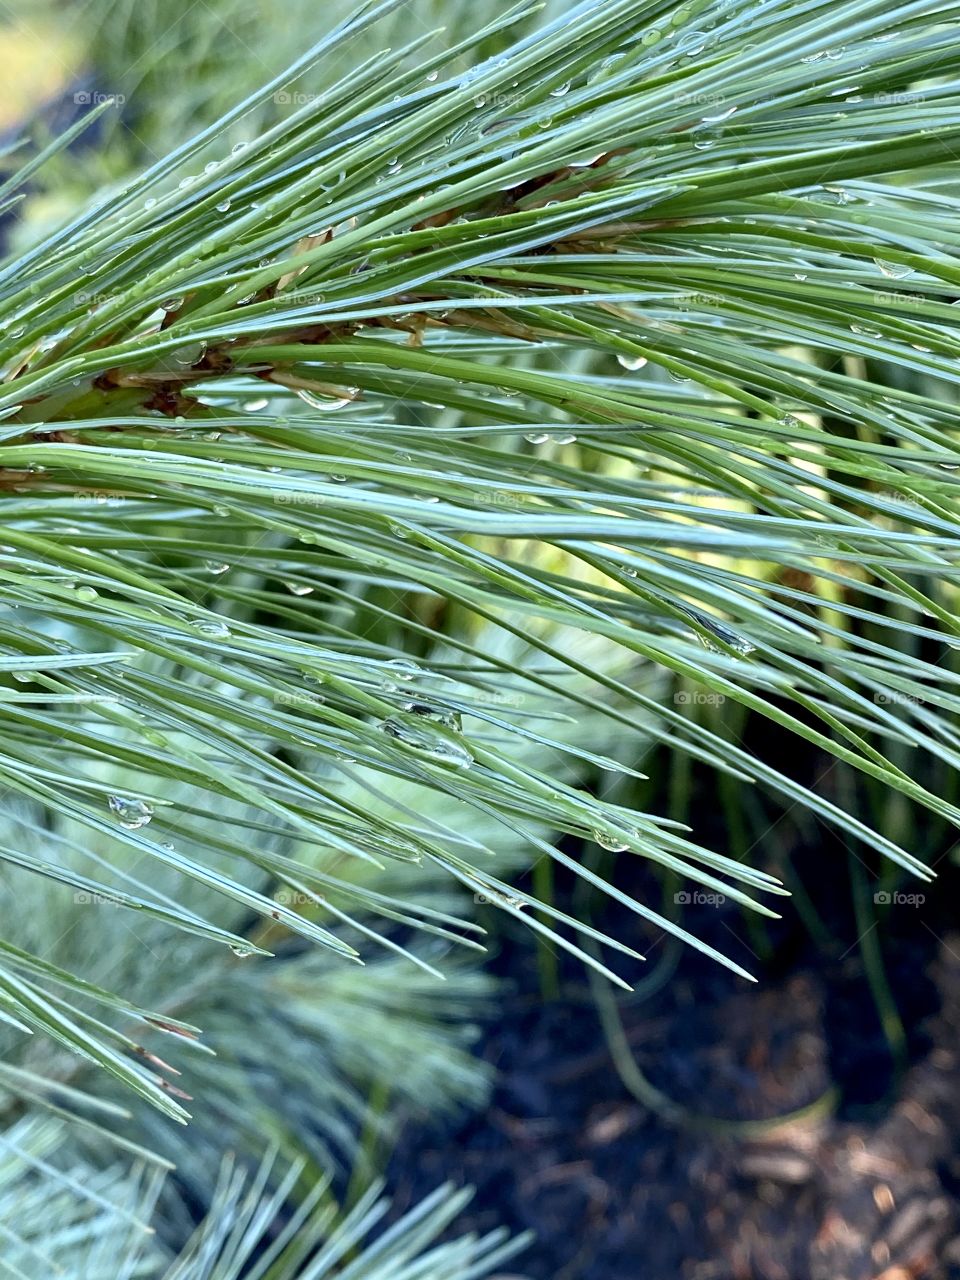 Water droplets on pine needles 